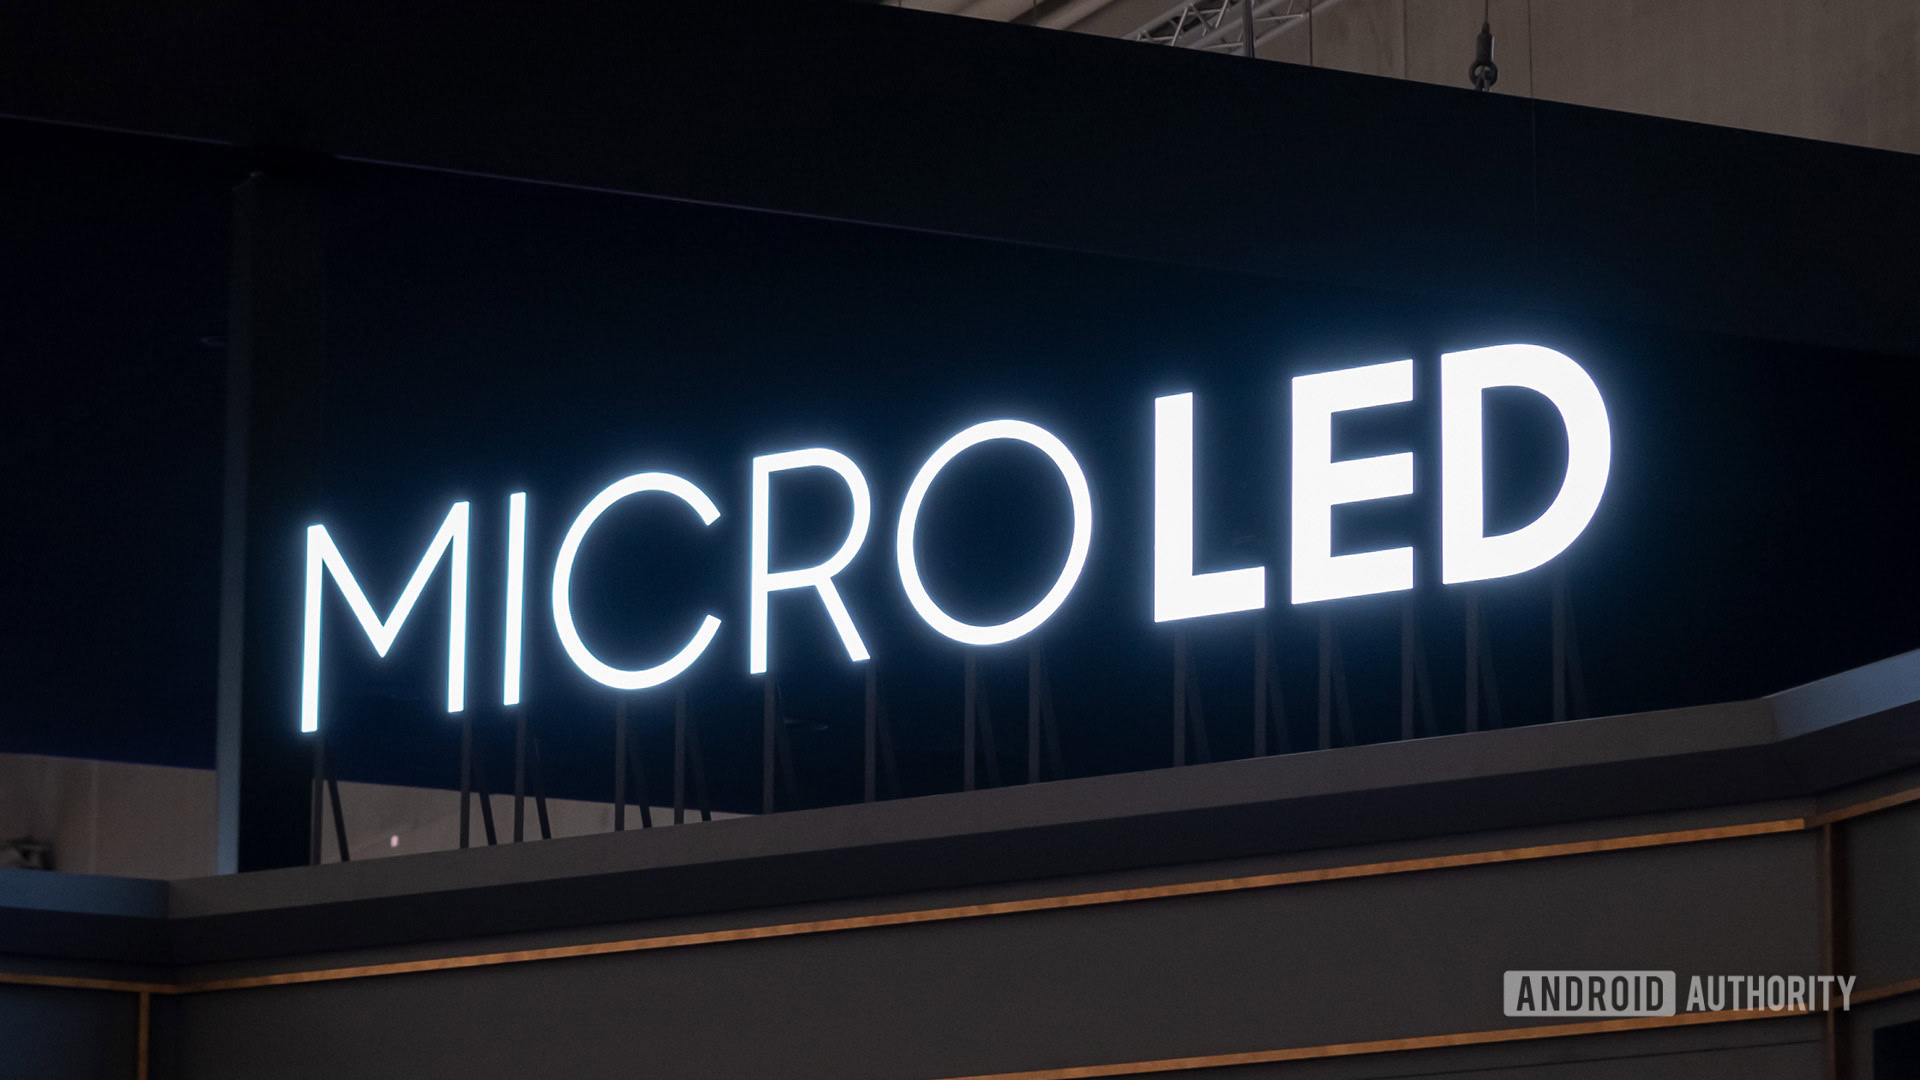 Mini LED vs MicroLED: What are the differences?